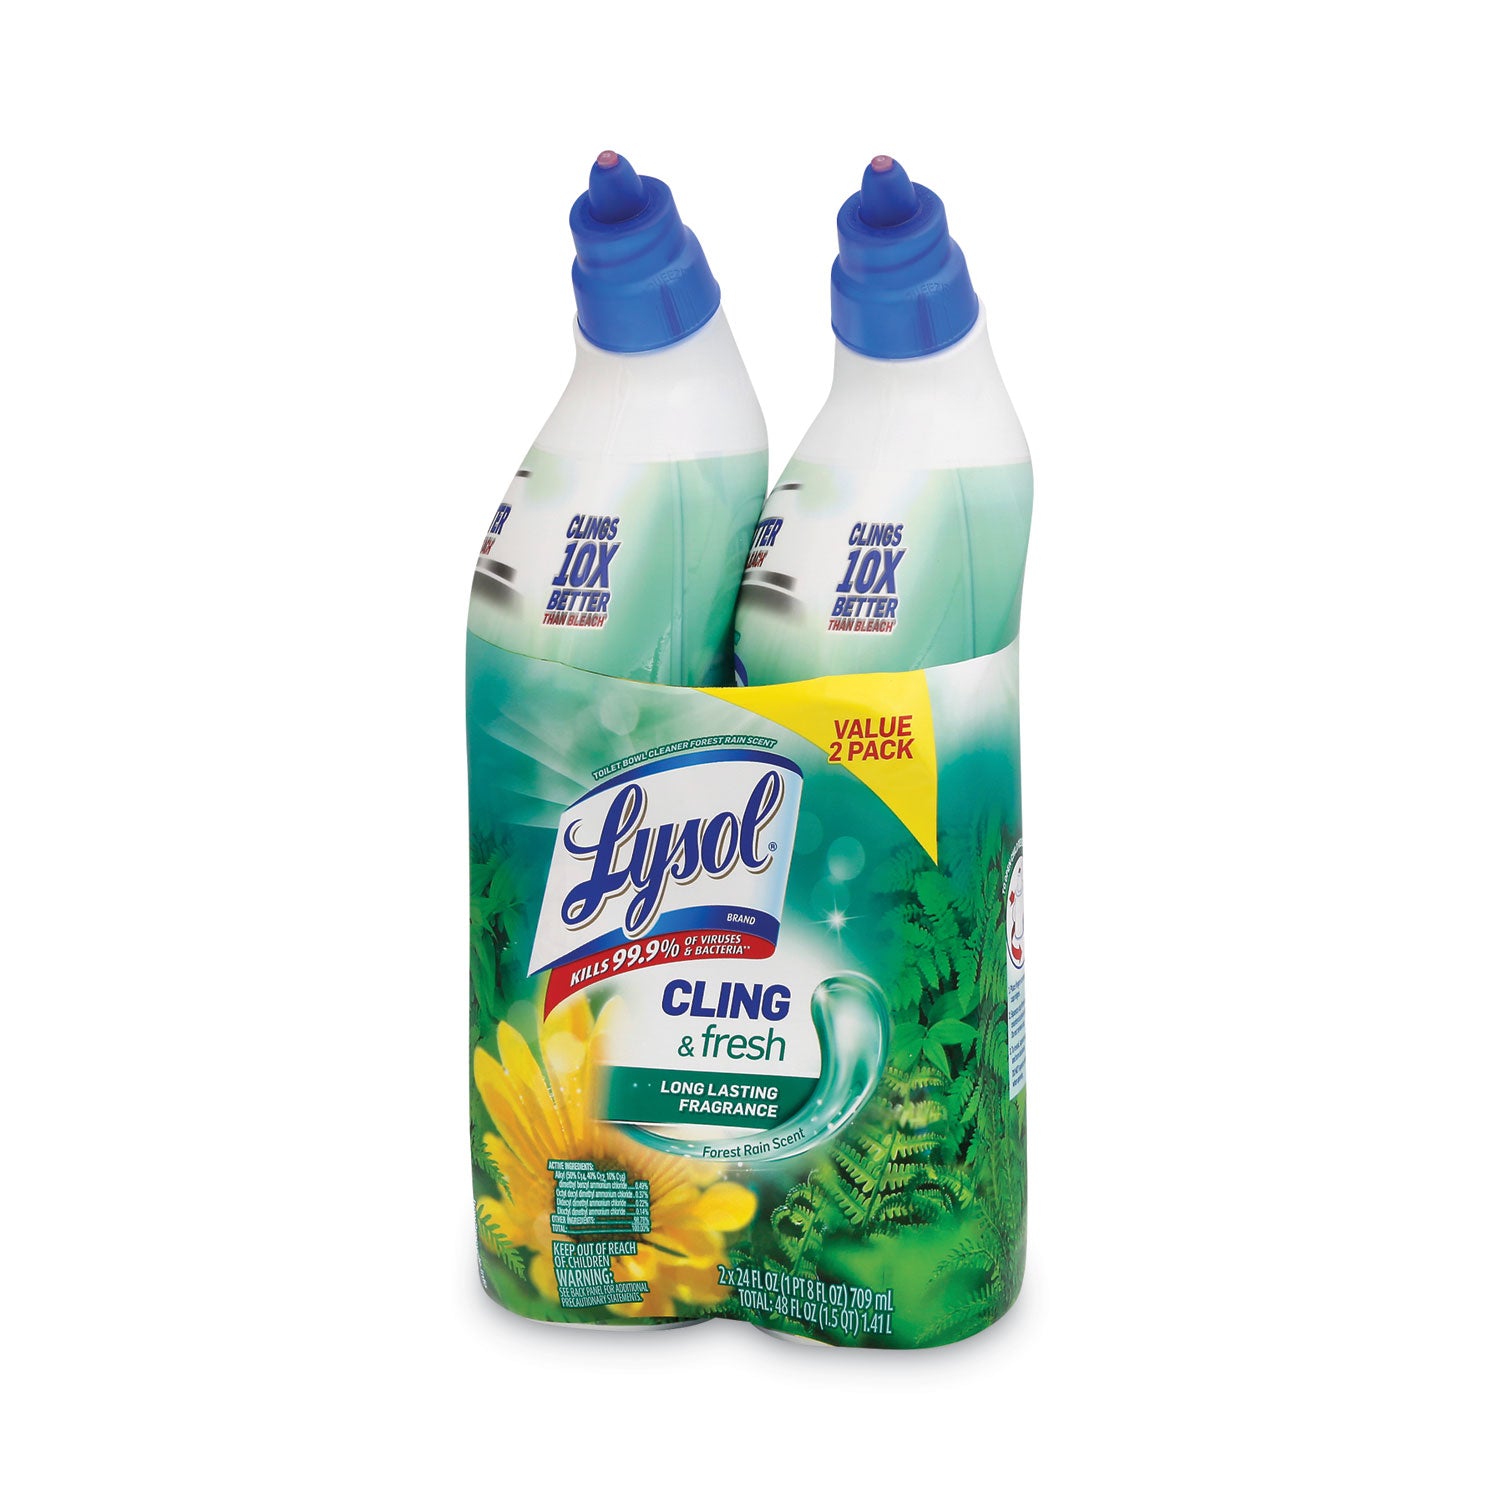 cling-and-fresh-toilet-bowl-cleaner-forest-rain-scent-24-oz-2-pack_rac98015pk - 7